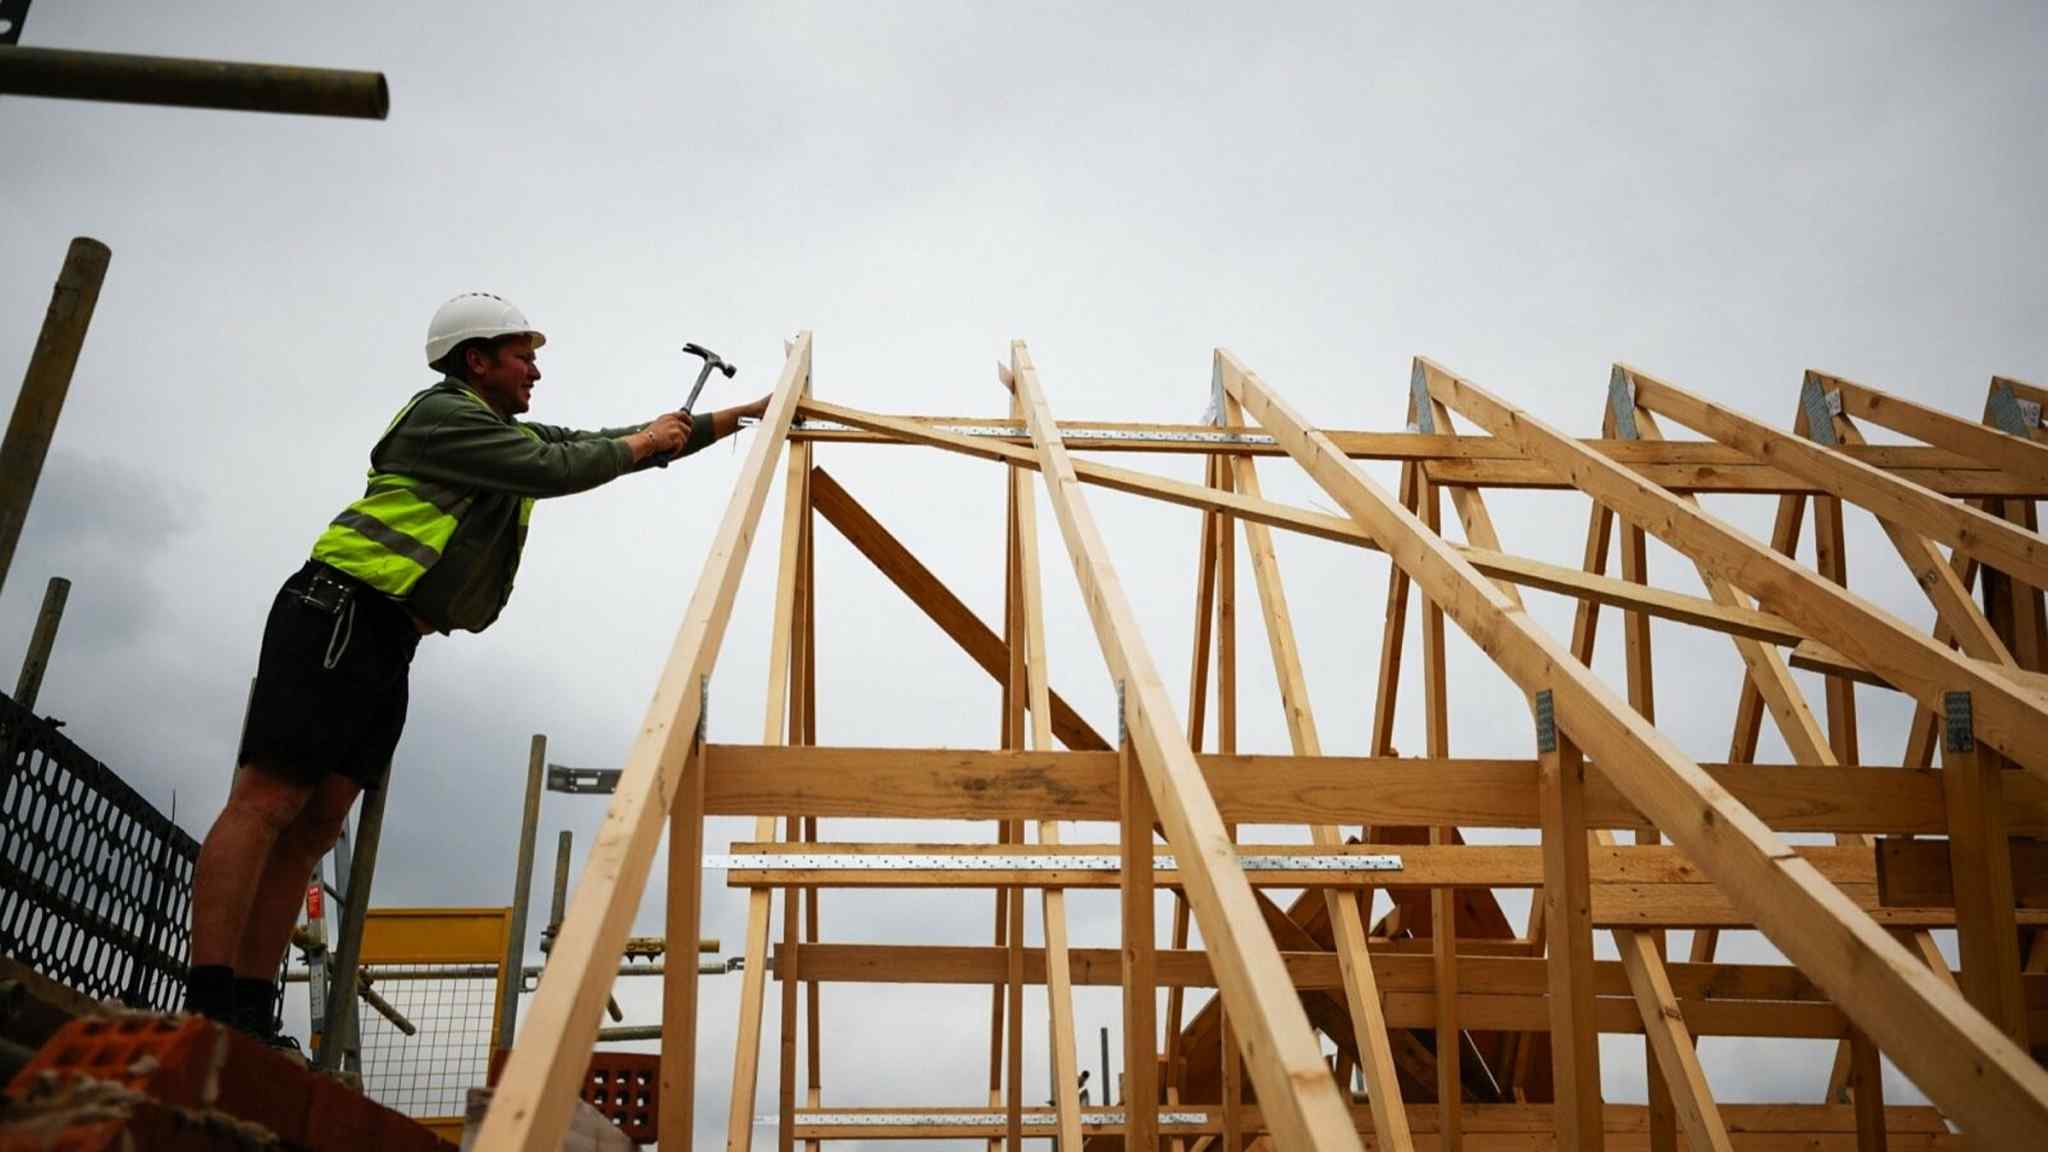 Live news updates: US housing starts decline as high inflation and interest rates bite